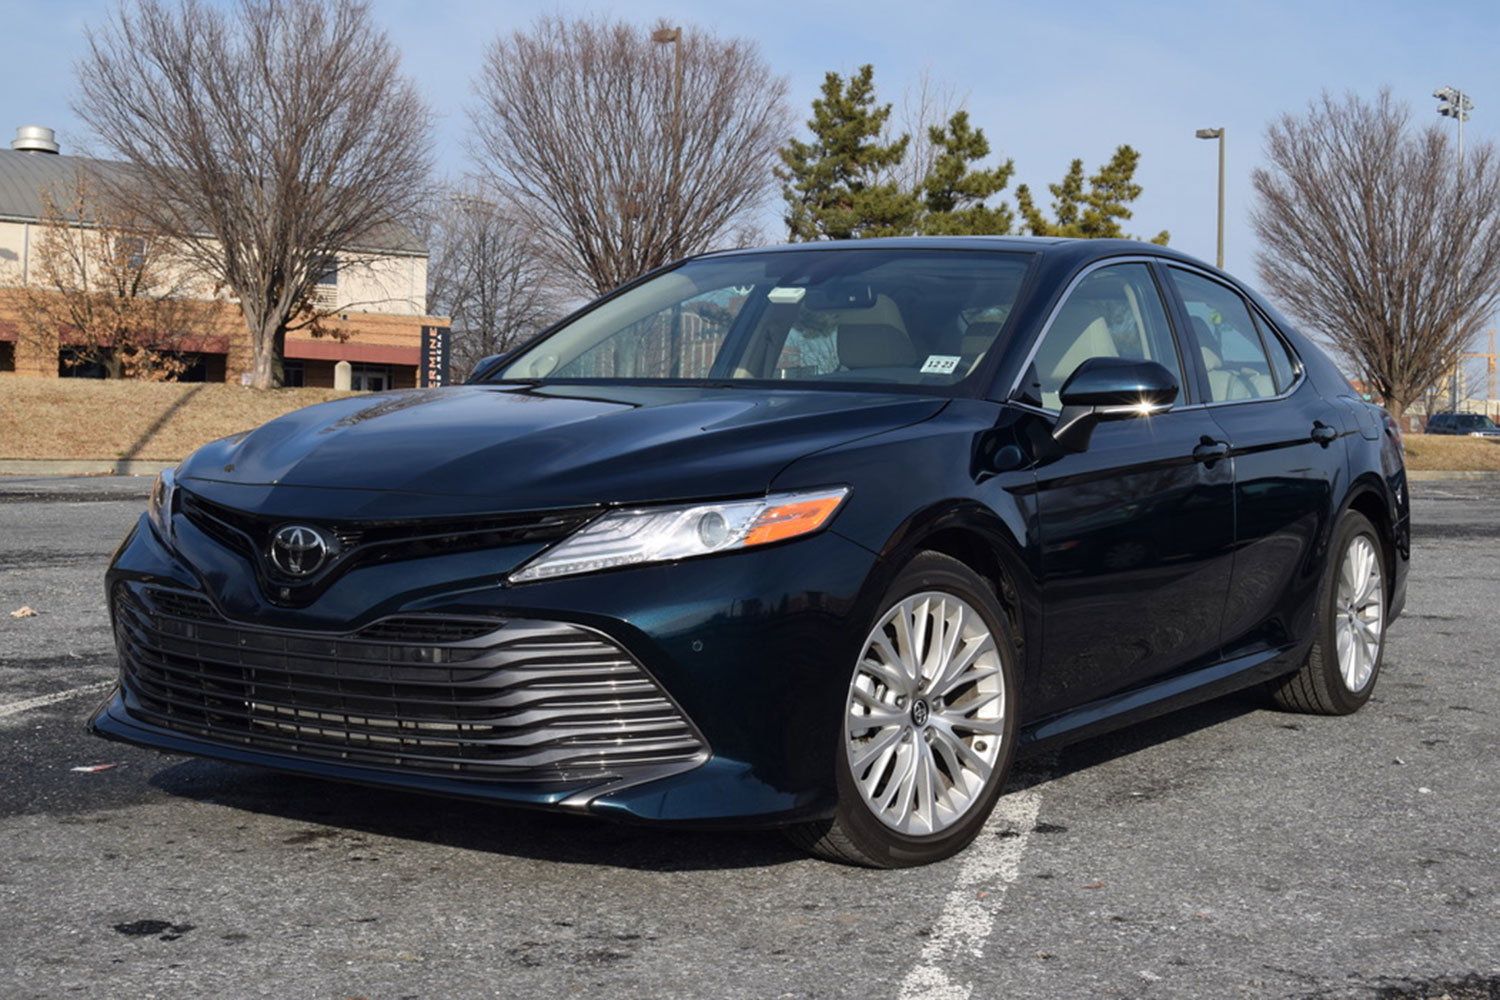 2019 Toyota Camry Prices Reviews and Photos  MotorTrend